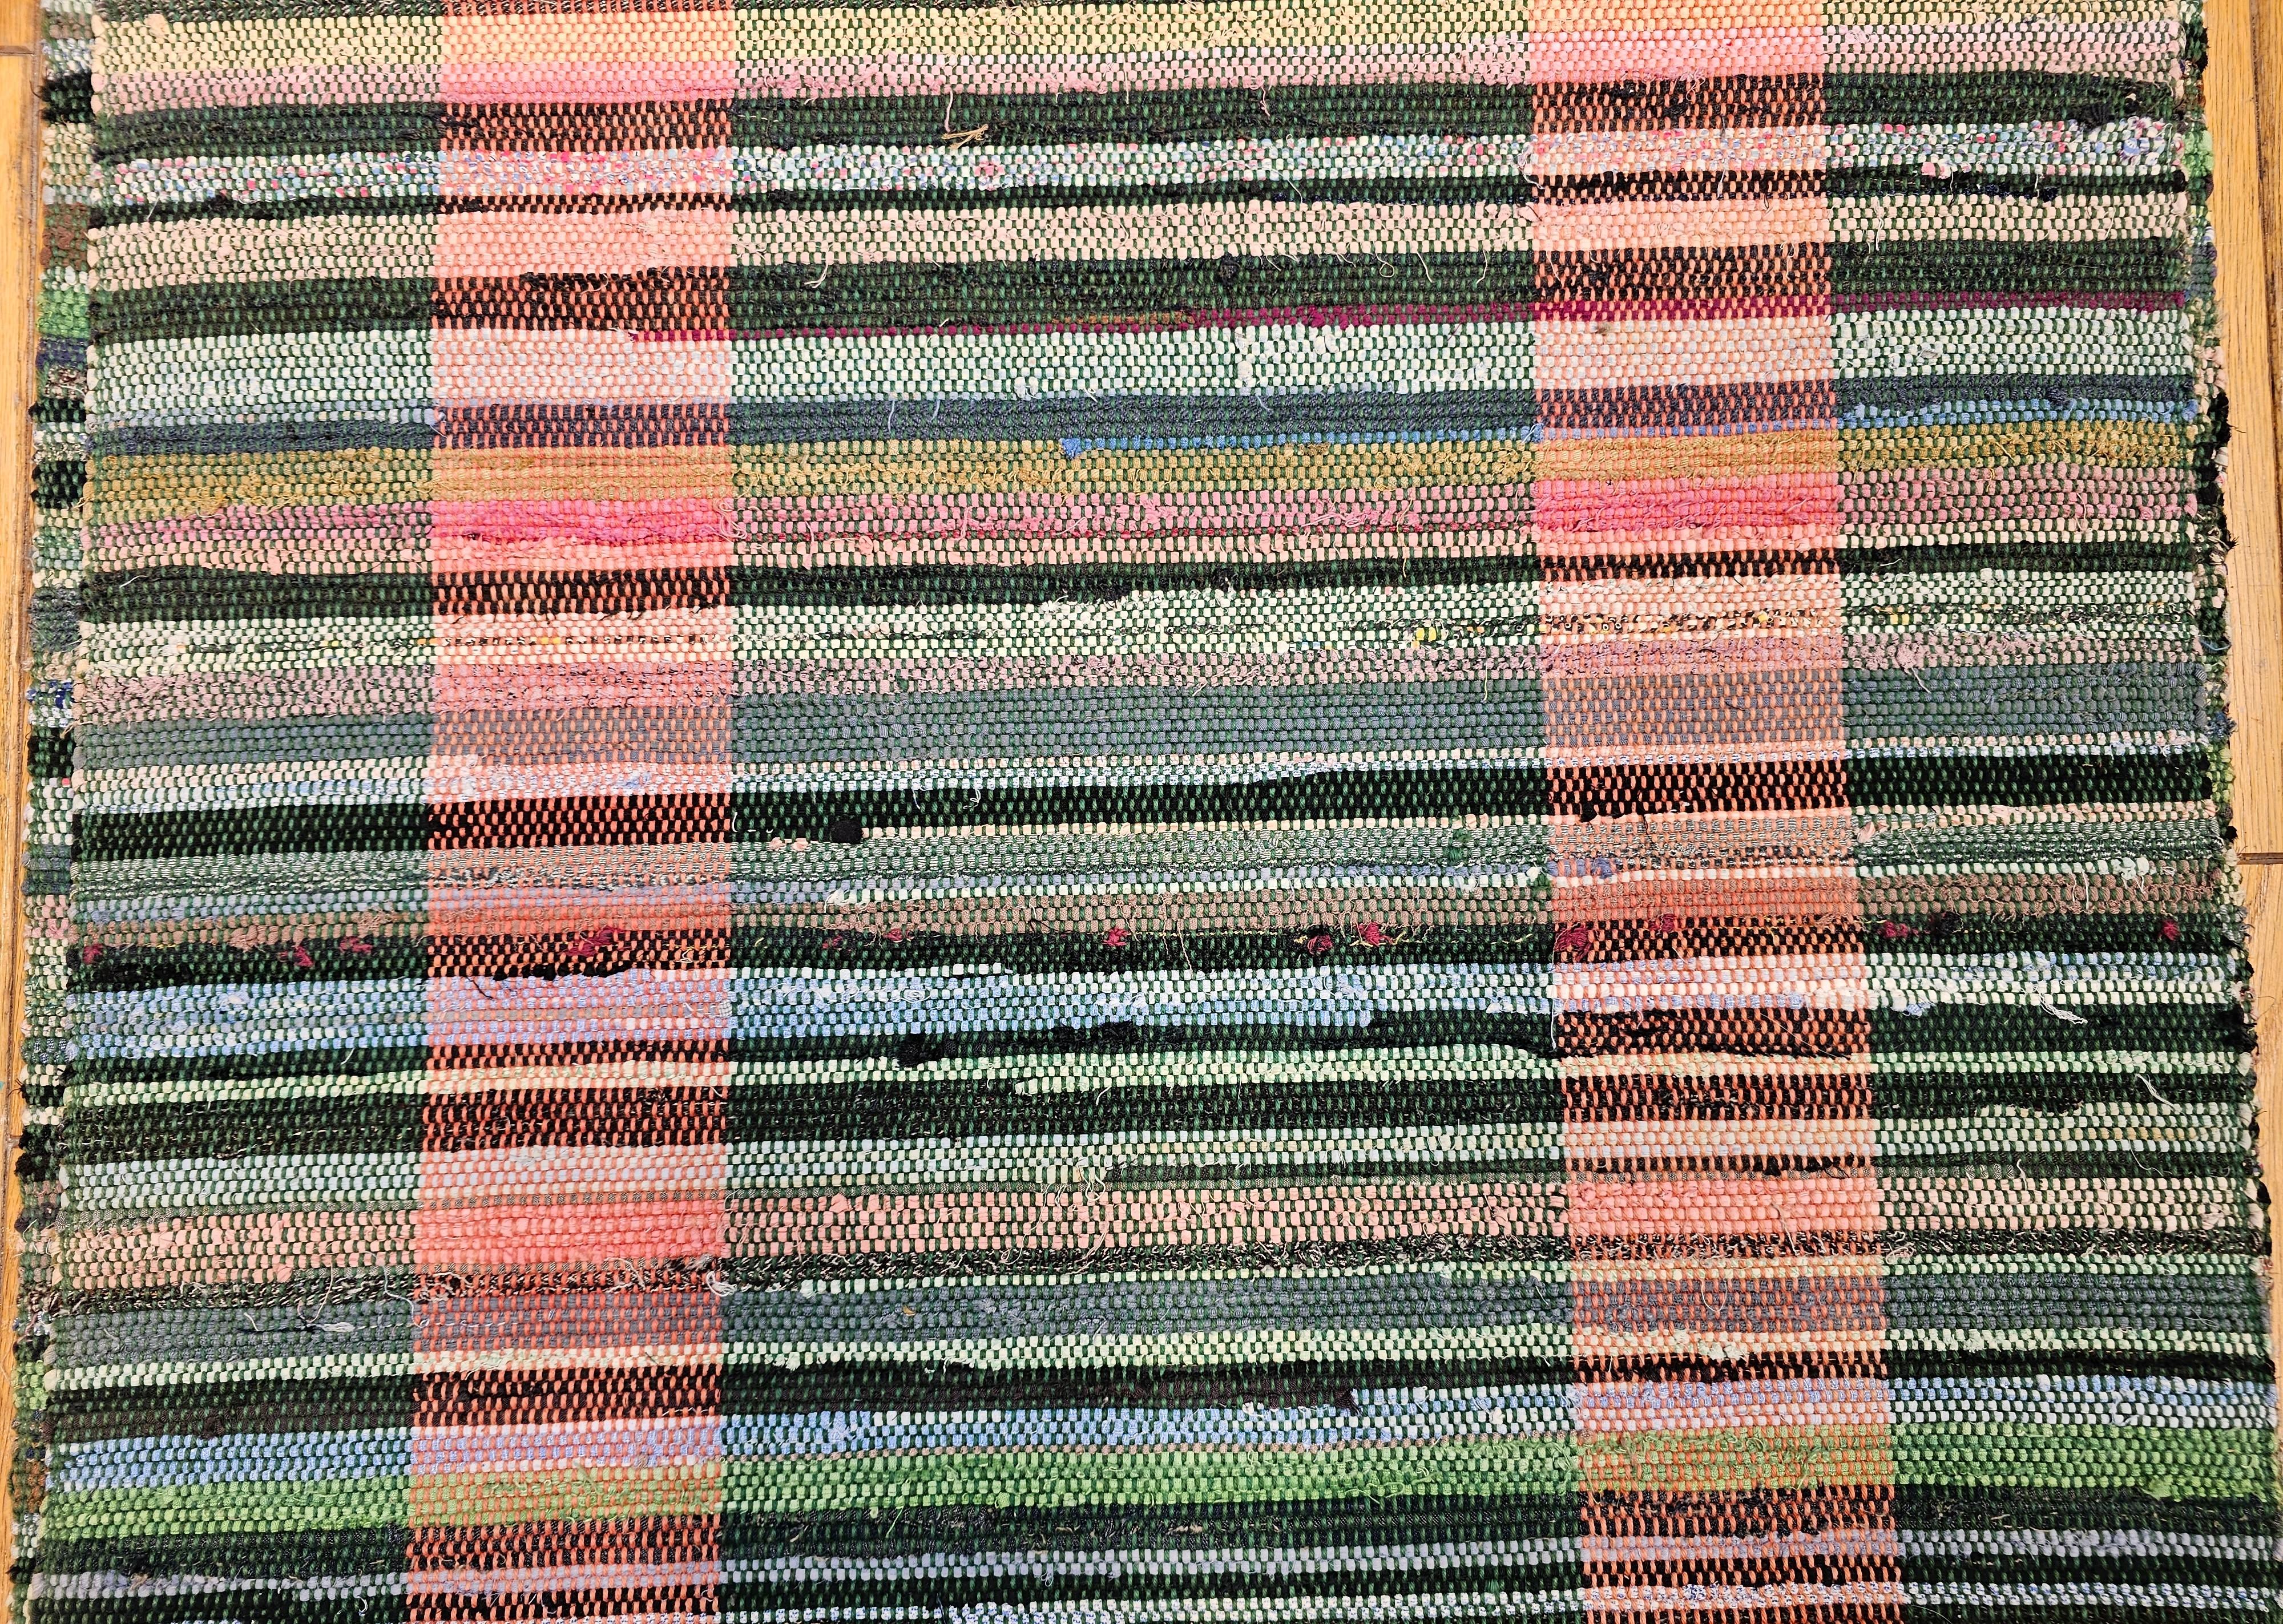 Vintage American Rag Long Runner in Stripe Pattern in Green, Pink, Blue, Cream In Excellent Condition For Sale In Barrington, IL